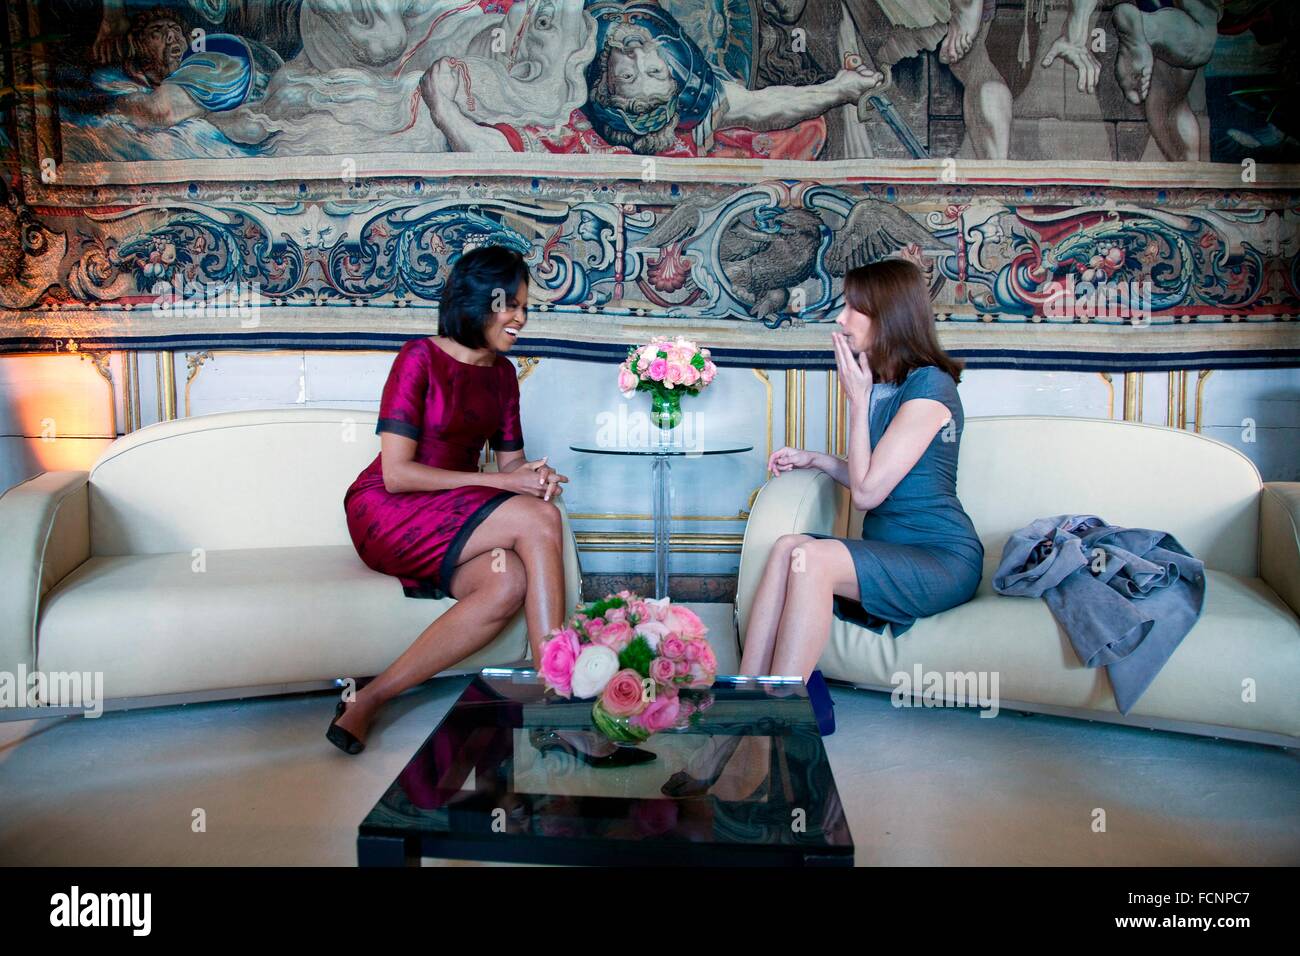 First Lady Michelle Obama meets with Carla Bruni Sarkozy, wife of French President Sarkozy at the Palais Rohan April 3, 2009 in Strasbourg, France. Stock Photo